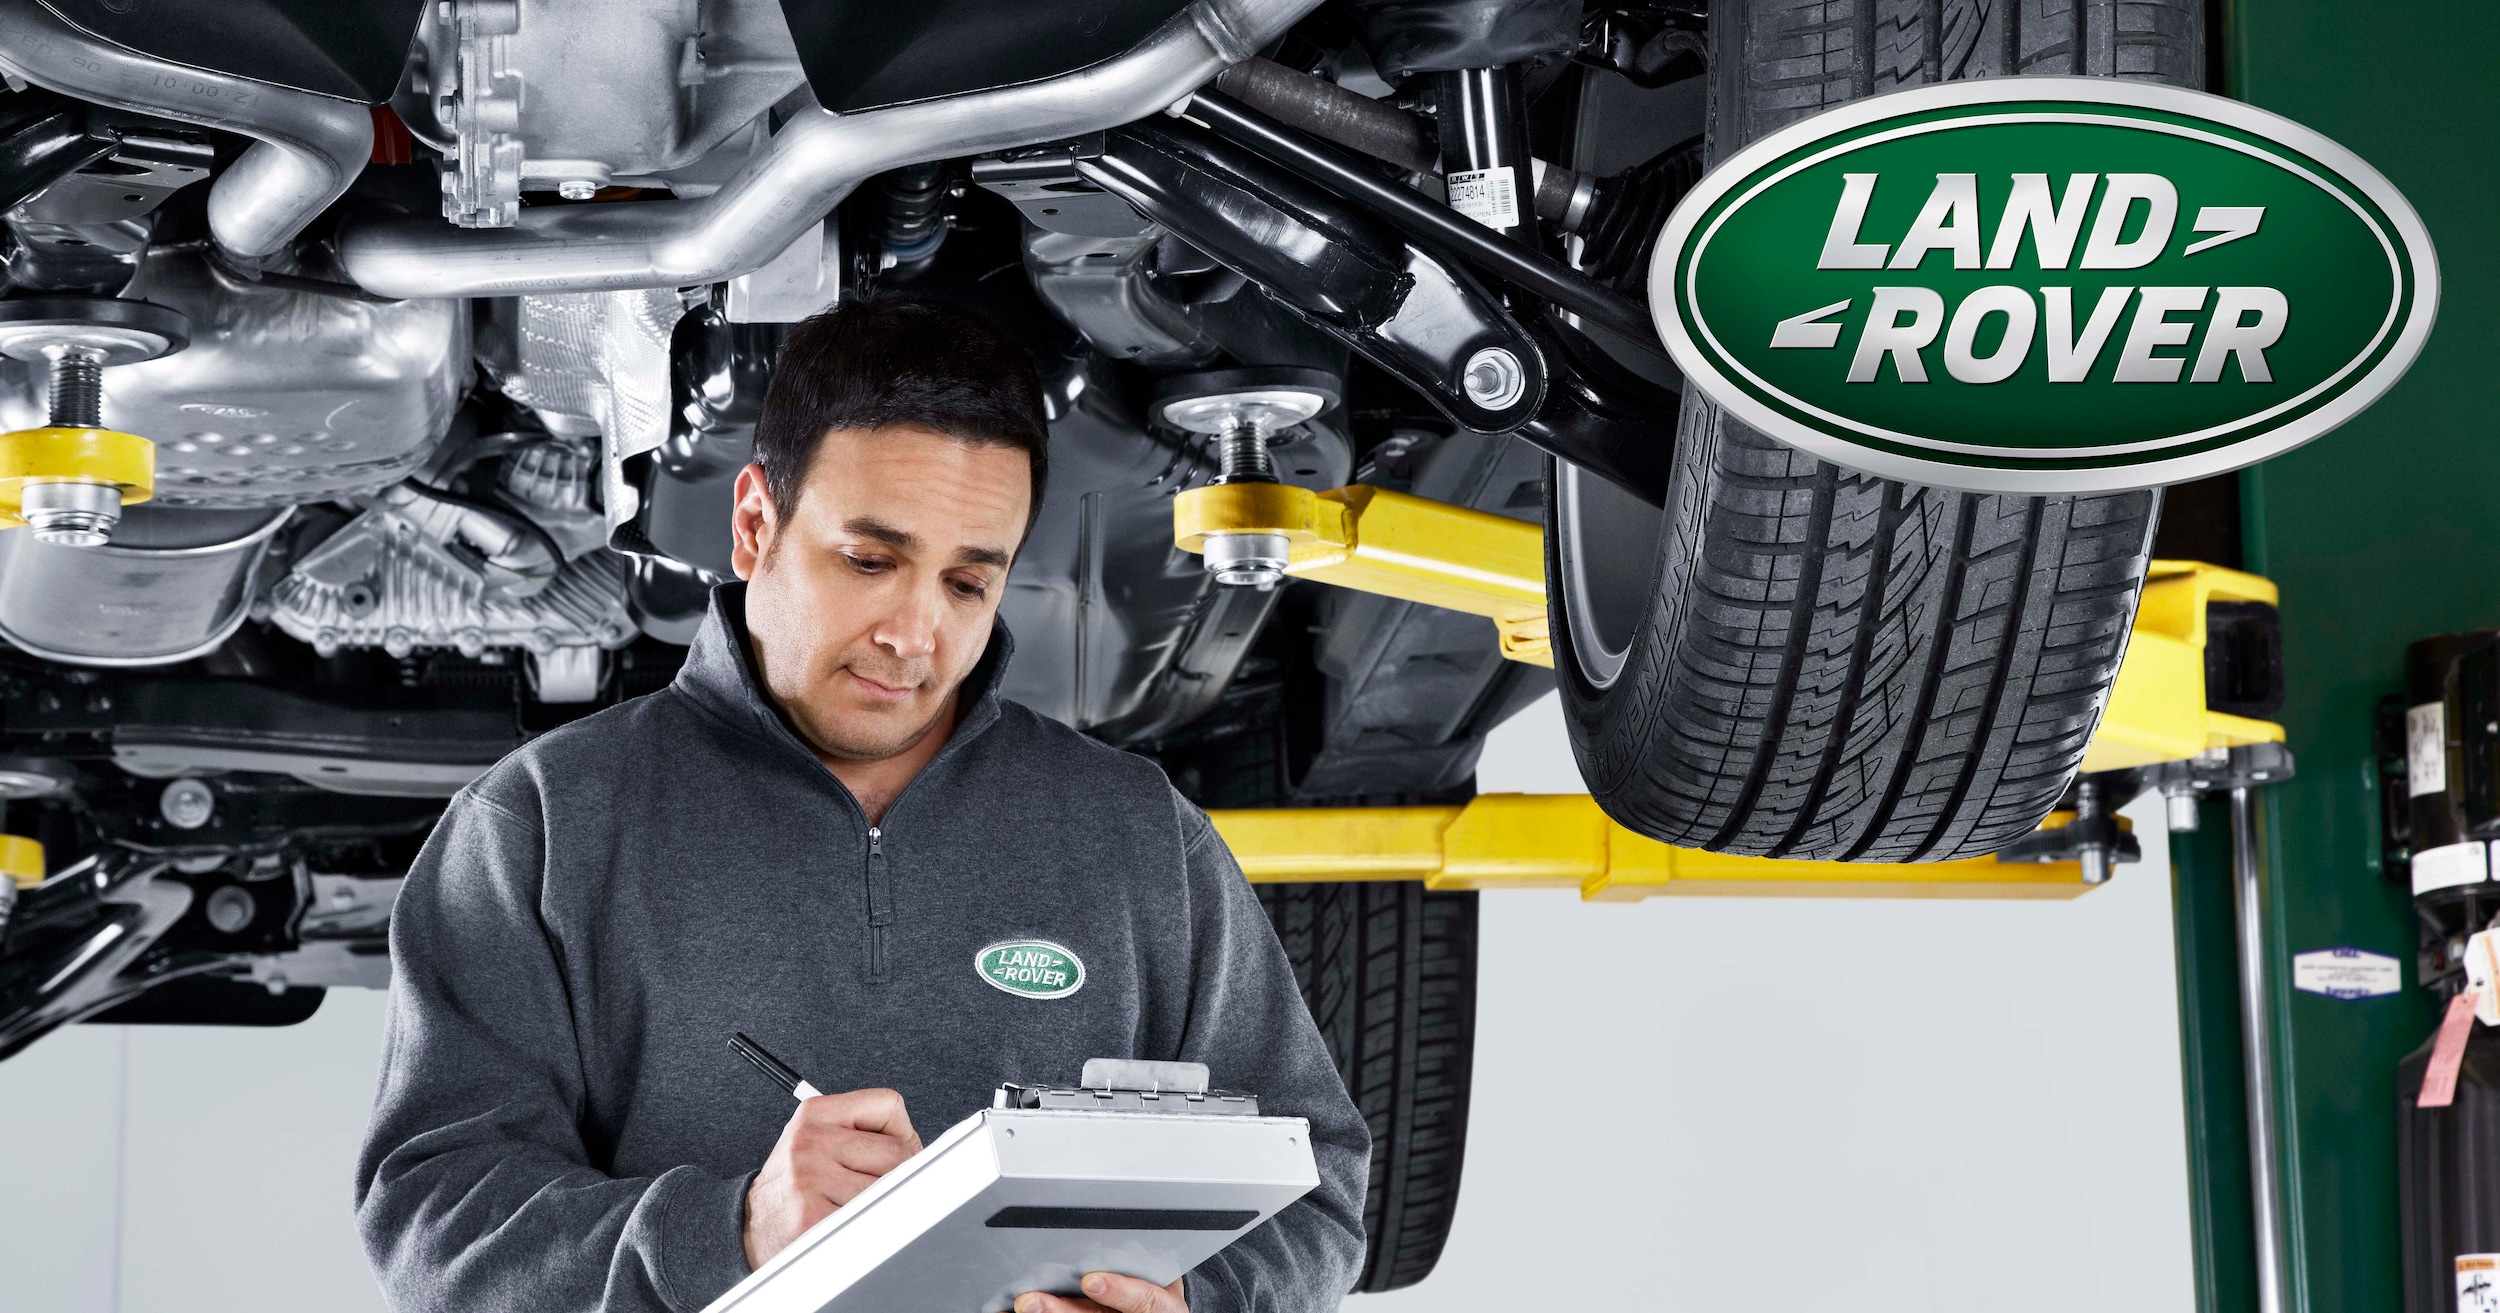 Land Rover Service Coupons in Knoxville, TN Land Rover Knoxville